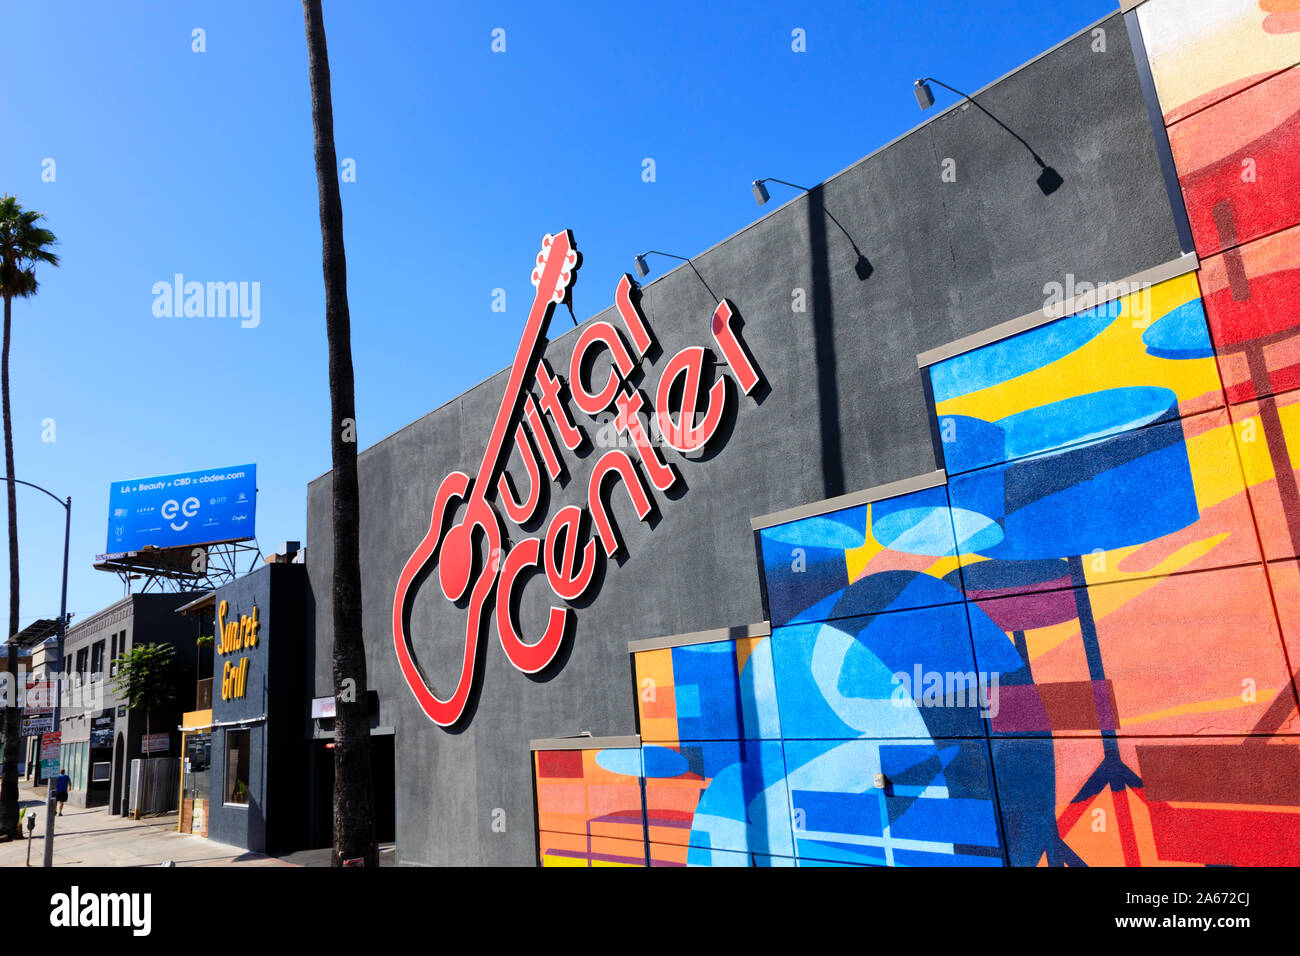 Guitar Center, musical instrument retailer, Hollywood, Los Angeles, California, United States of America. October 2019 Stock Photo